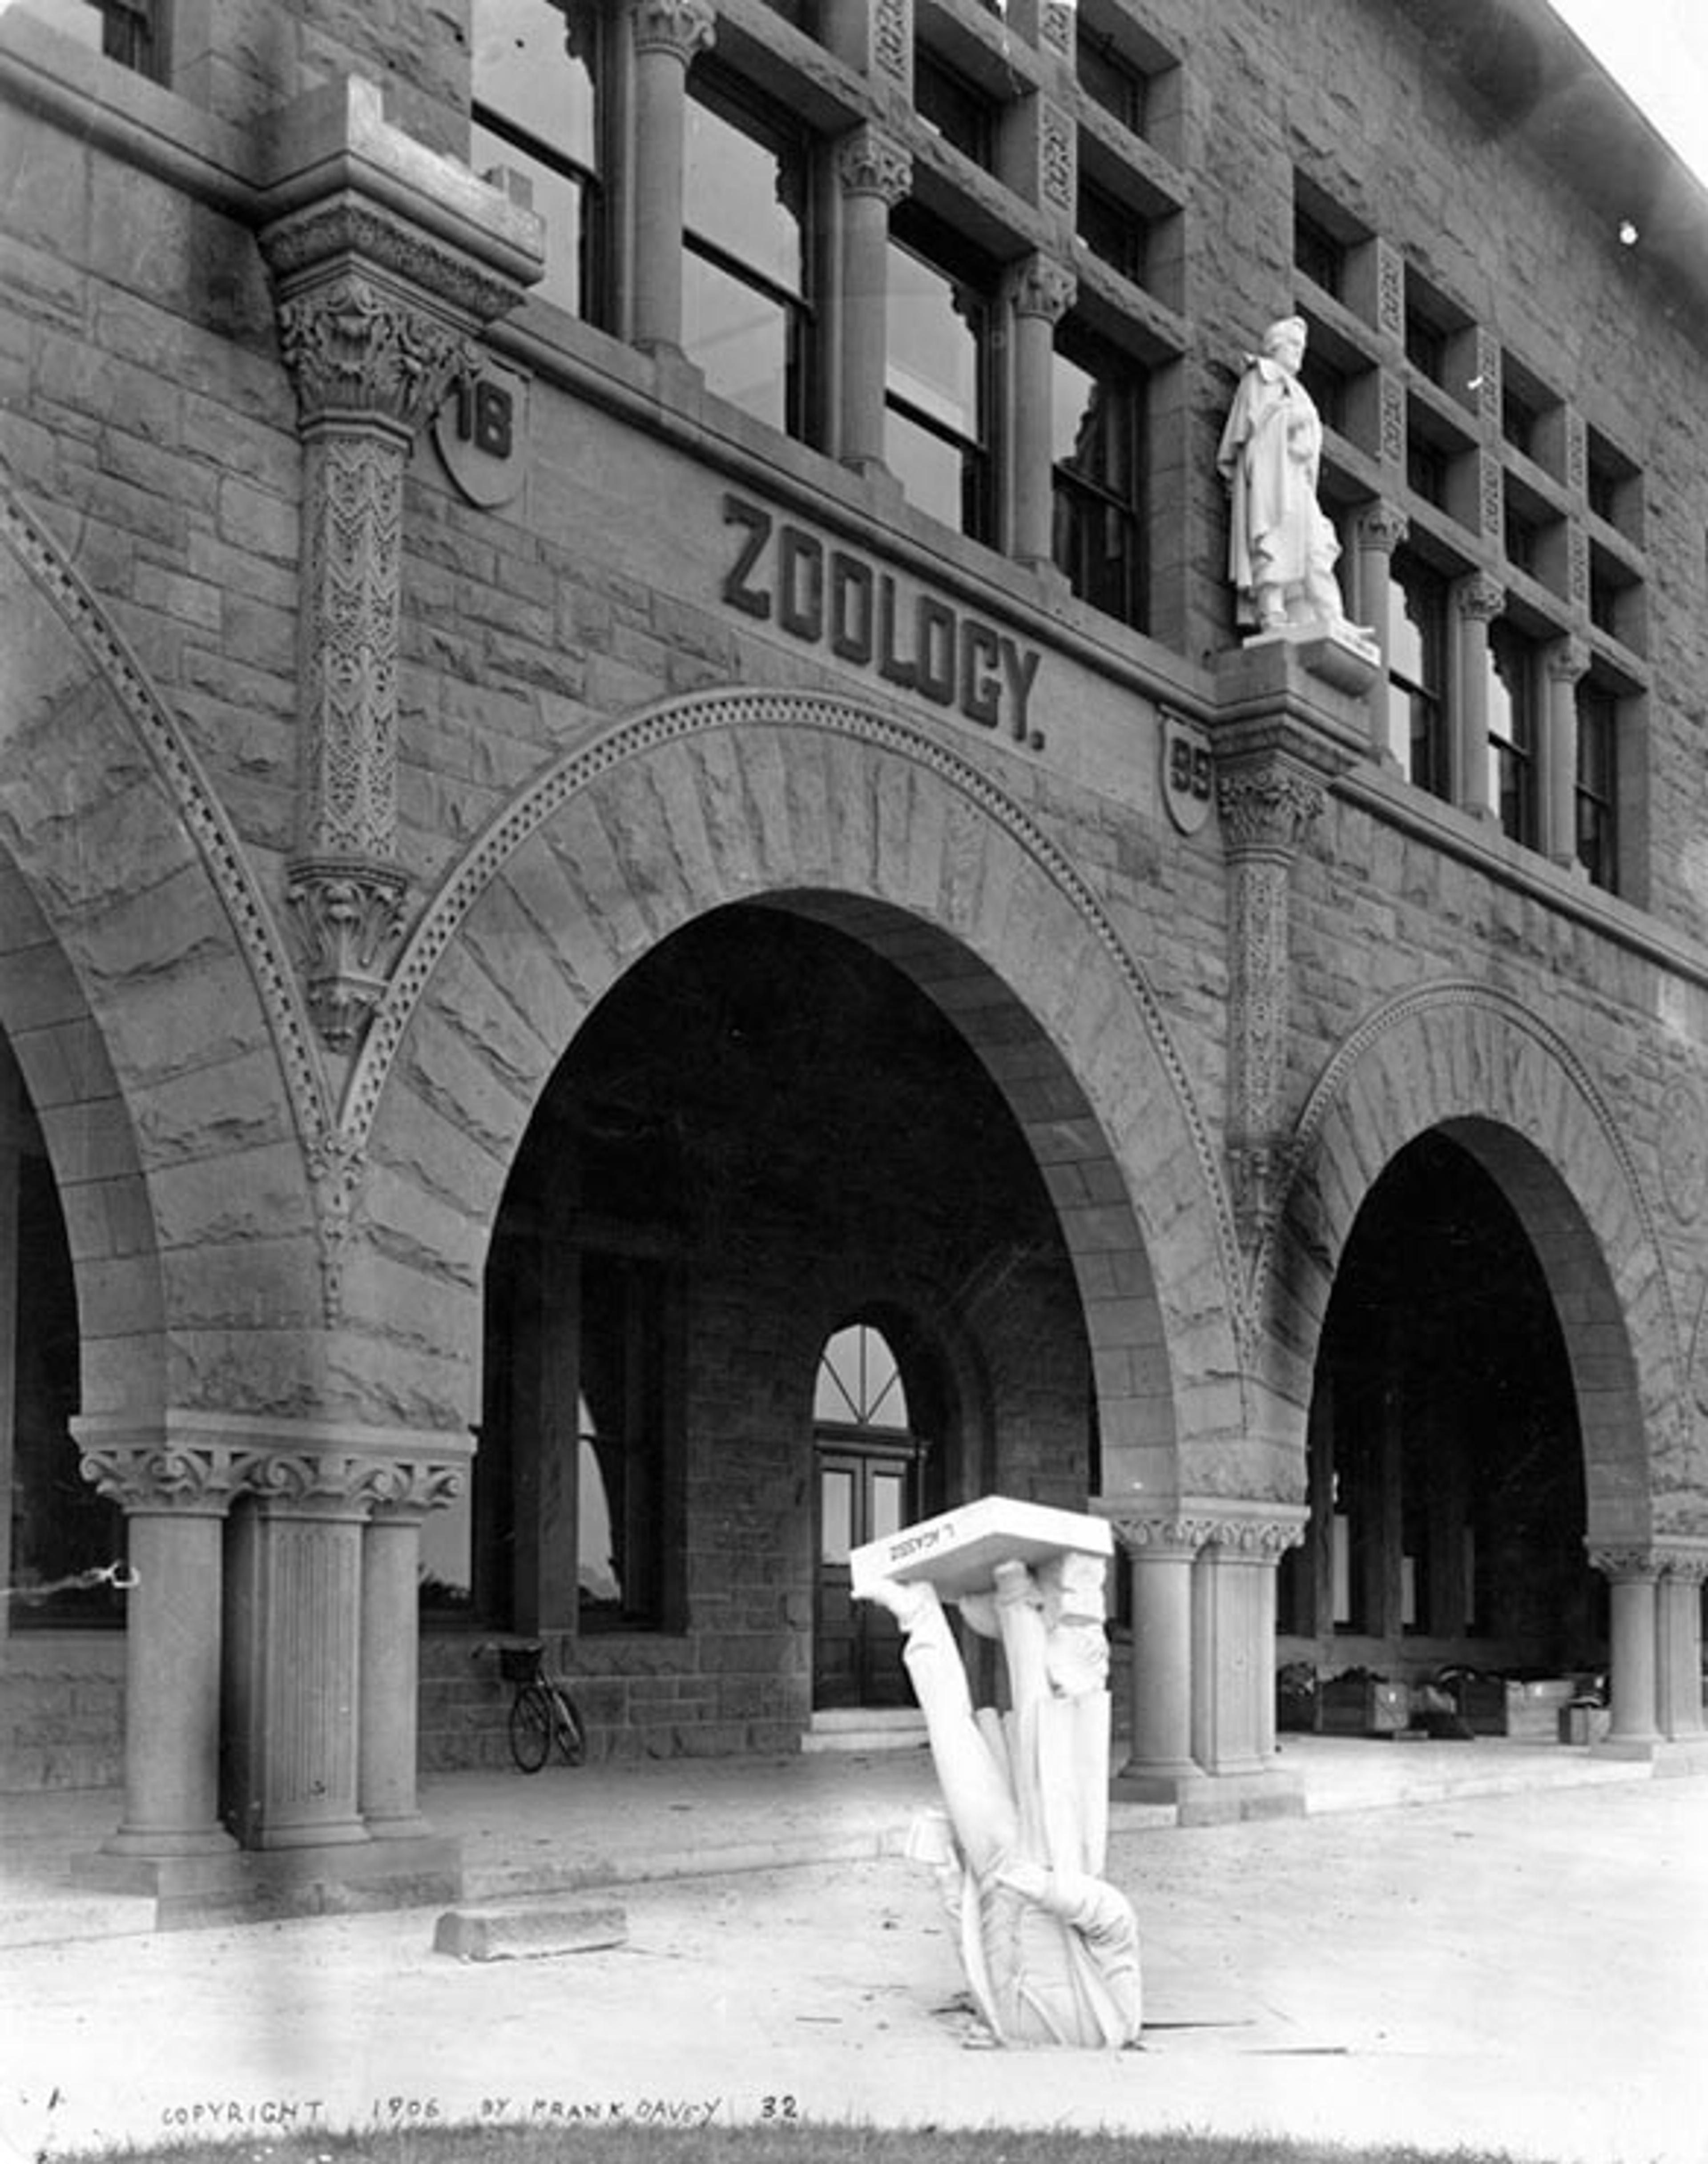 Archways of a Zoology building from 1899 shown behind a toppled statue of a figure standing on its head. The building has gothic architectural elements.